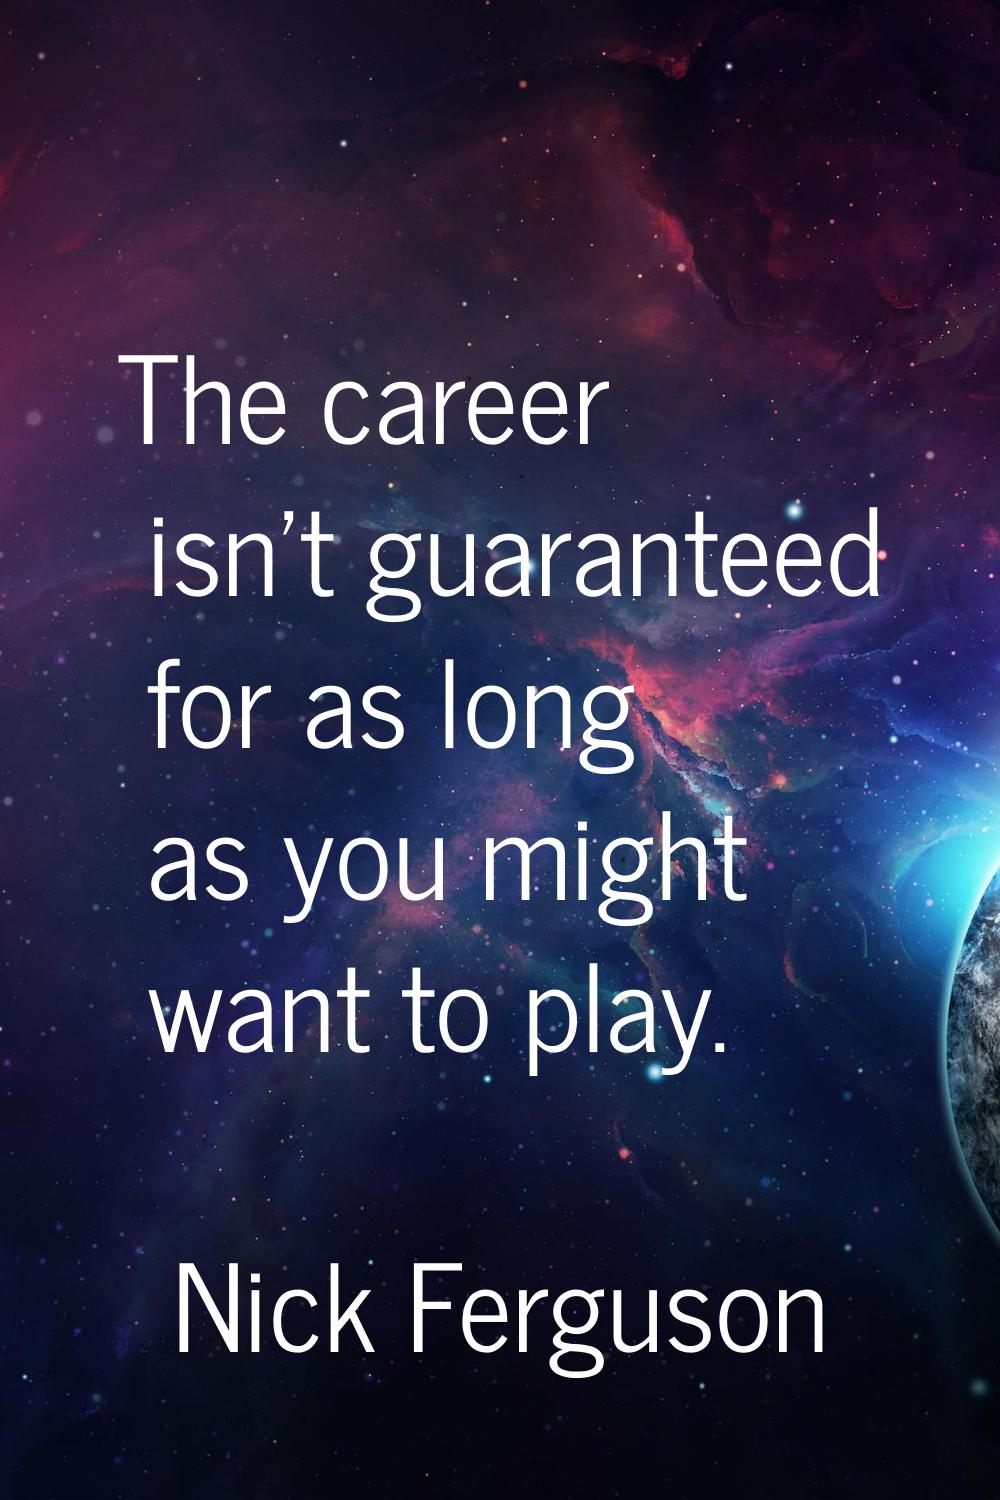 The career isn't guaranteed for as long as you might want to play.